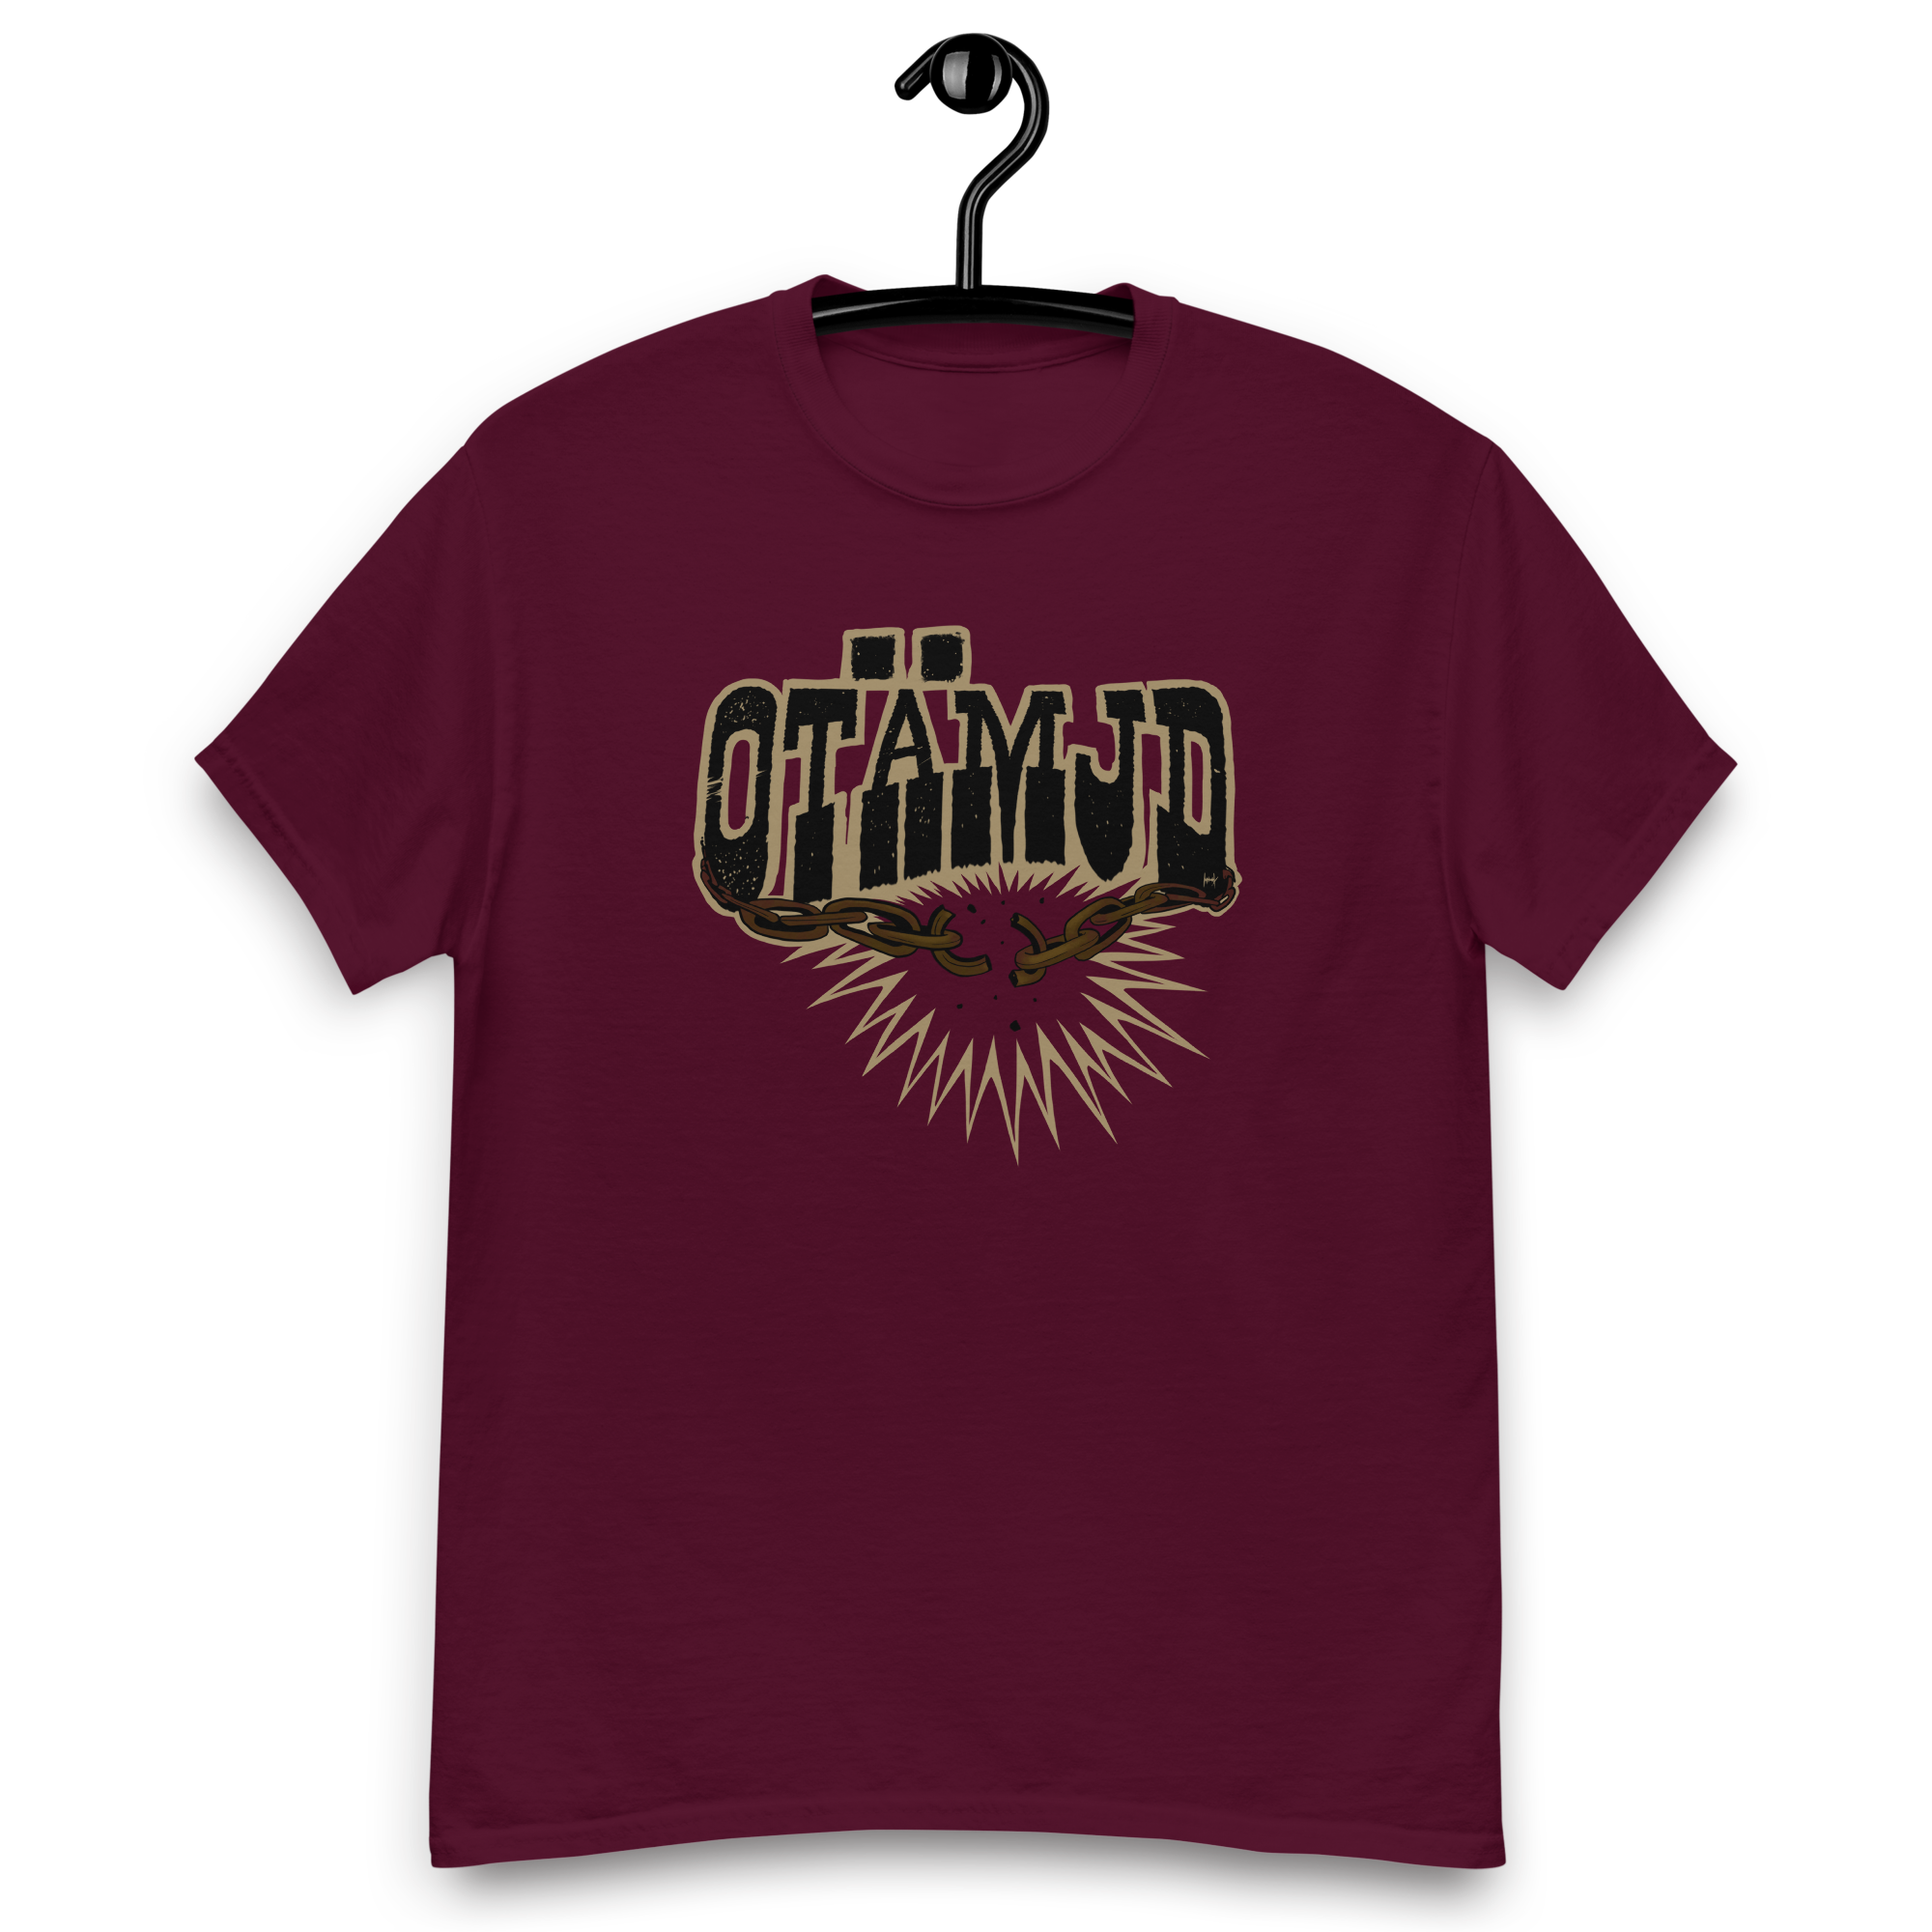 mens-classic-tee-maroon-front-648a3a0f3f2f3.png